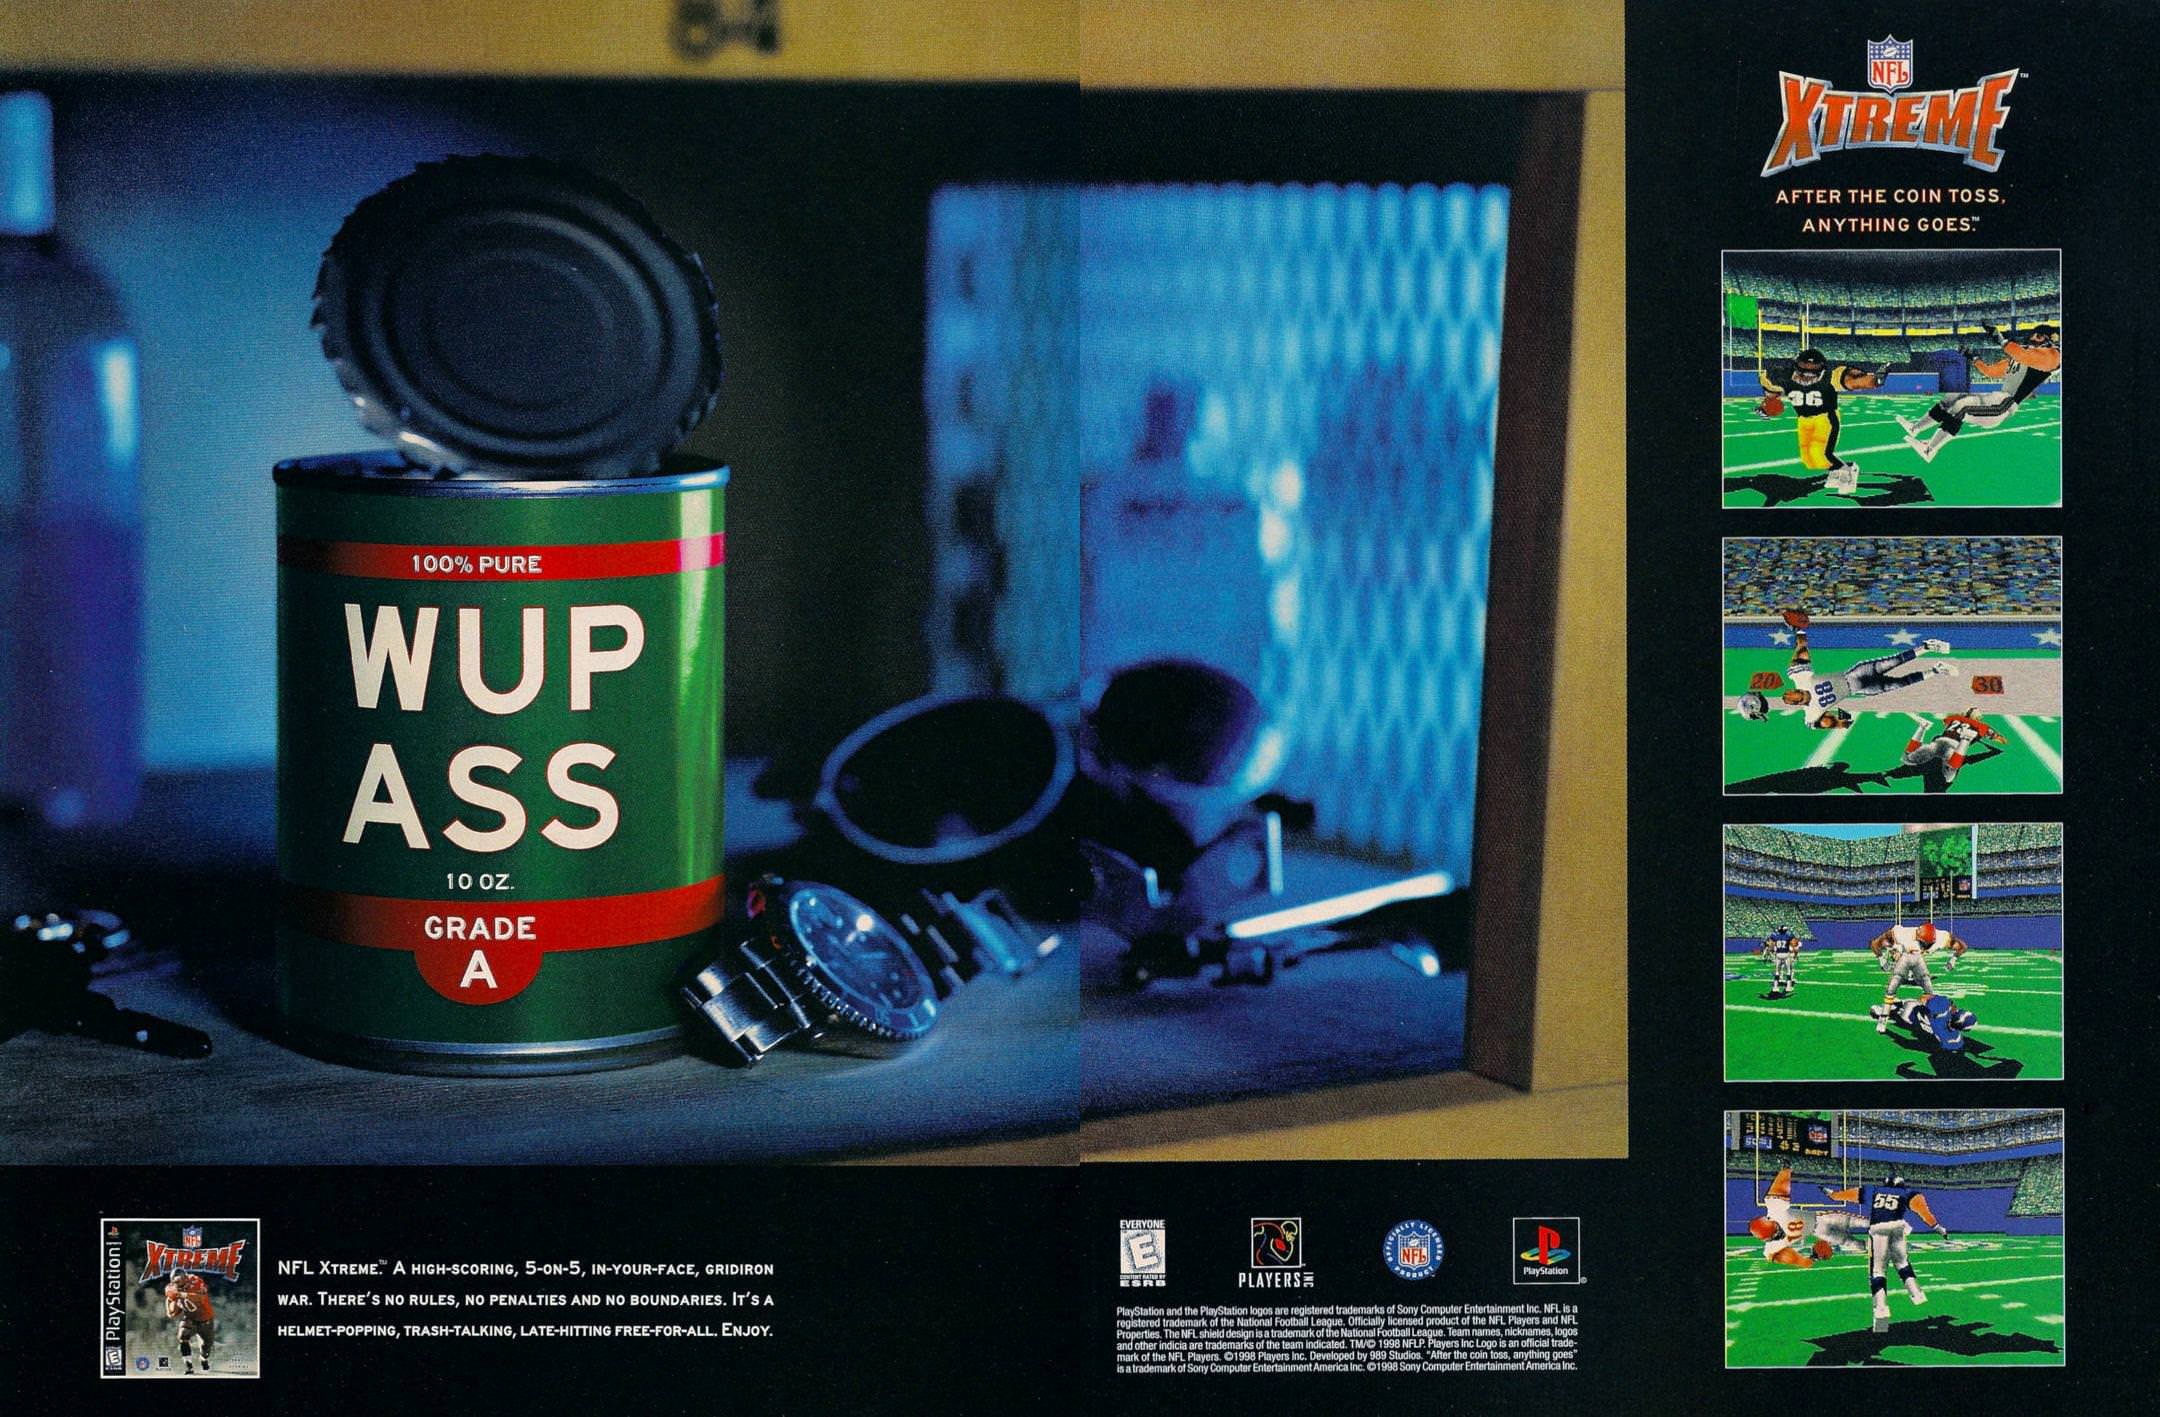 90s video game ads -  display device - Villems 100% Pure Wup Ass 10 02 Grade A Mpl Xtra H 55, , War. There'S No Rules, No Penalties And No Boundares. It'S A HelmetPopping, TrashTalking, LateNetting FreeForAll Day. Flaters After The Coin Toss, Anything Goe